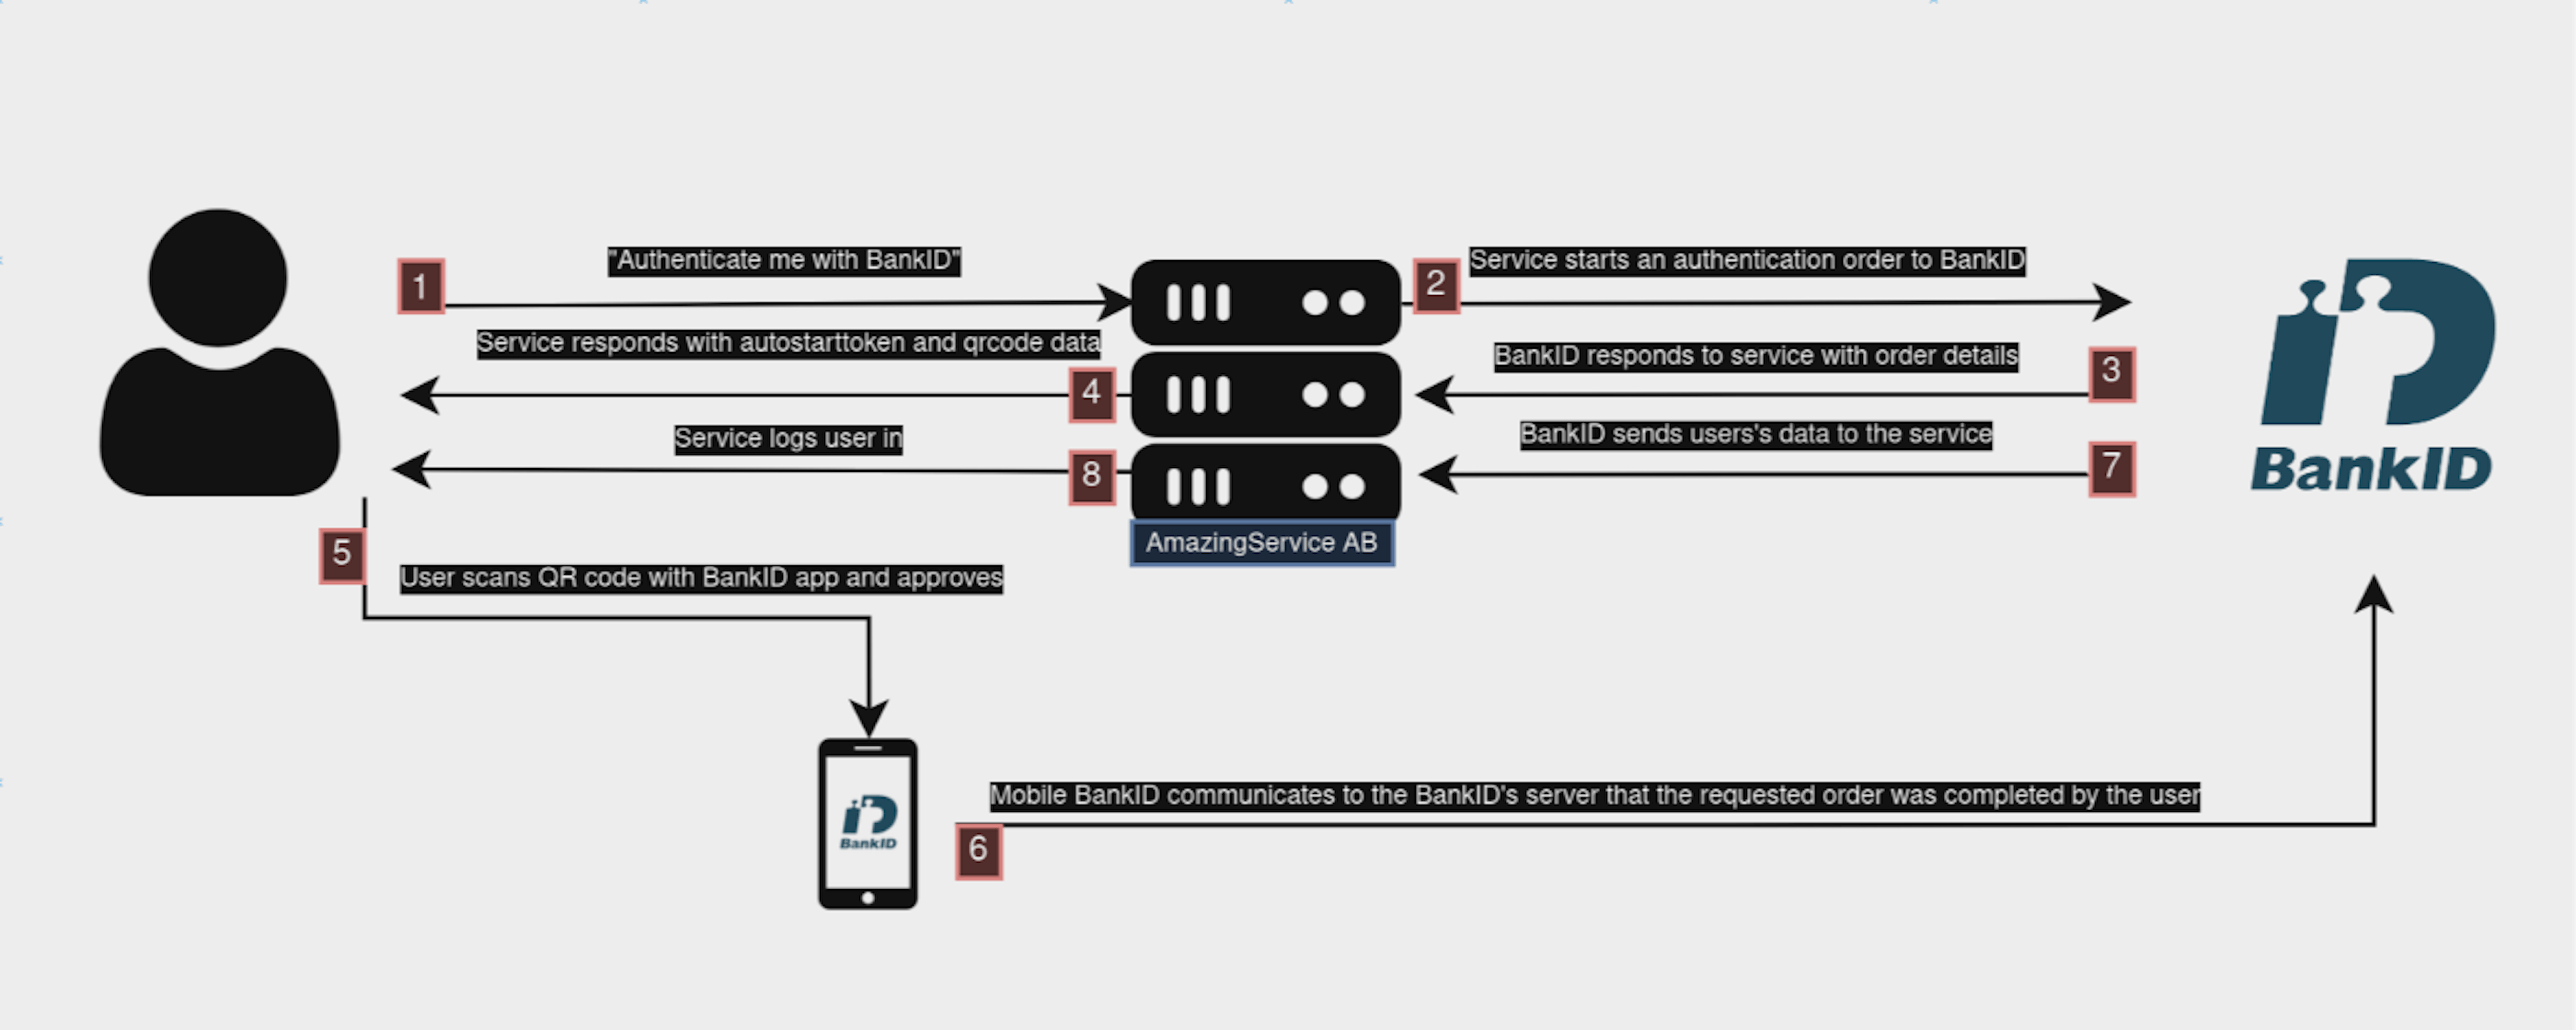 Authentication flow of BankID on another device